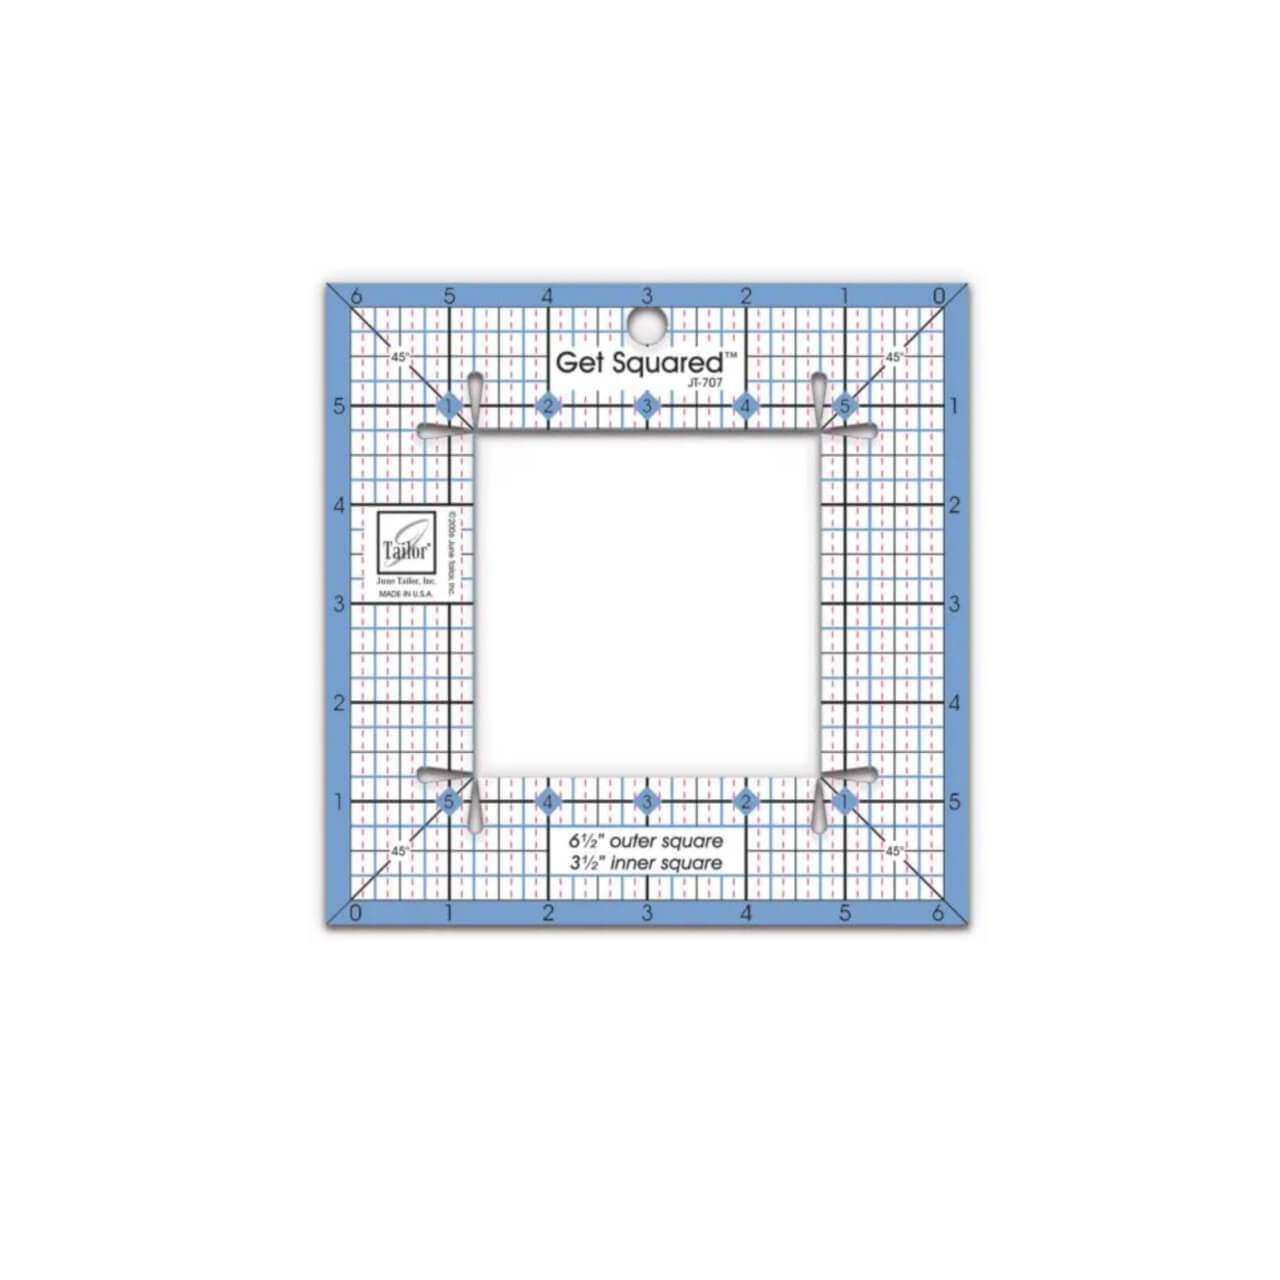 The Small Get Squared Ruler by June Tailor, a transparent square-shaped ruler with grid lines and a central square cutout, designed for accurately measuring and cutting fabric for quilting.